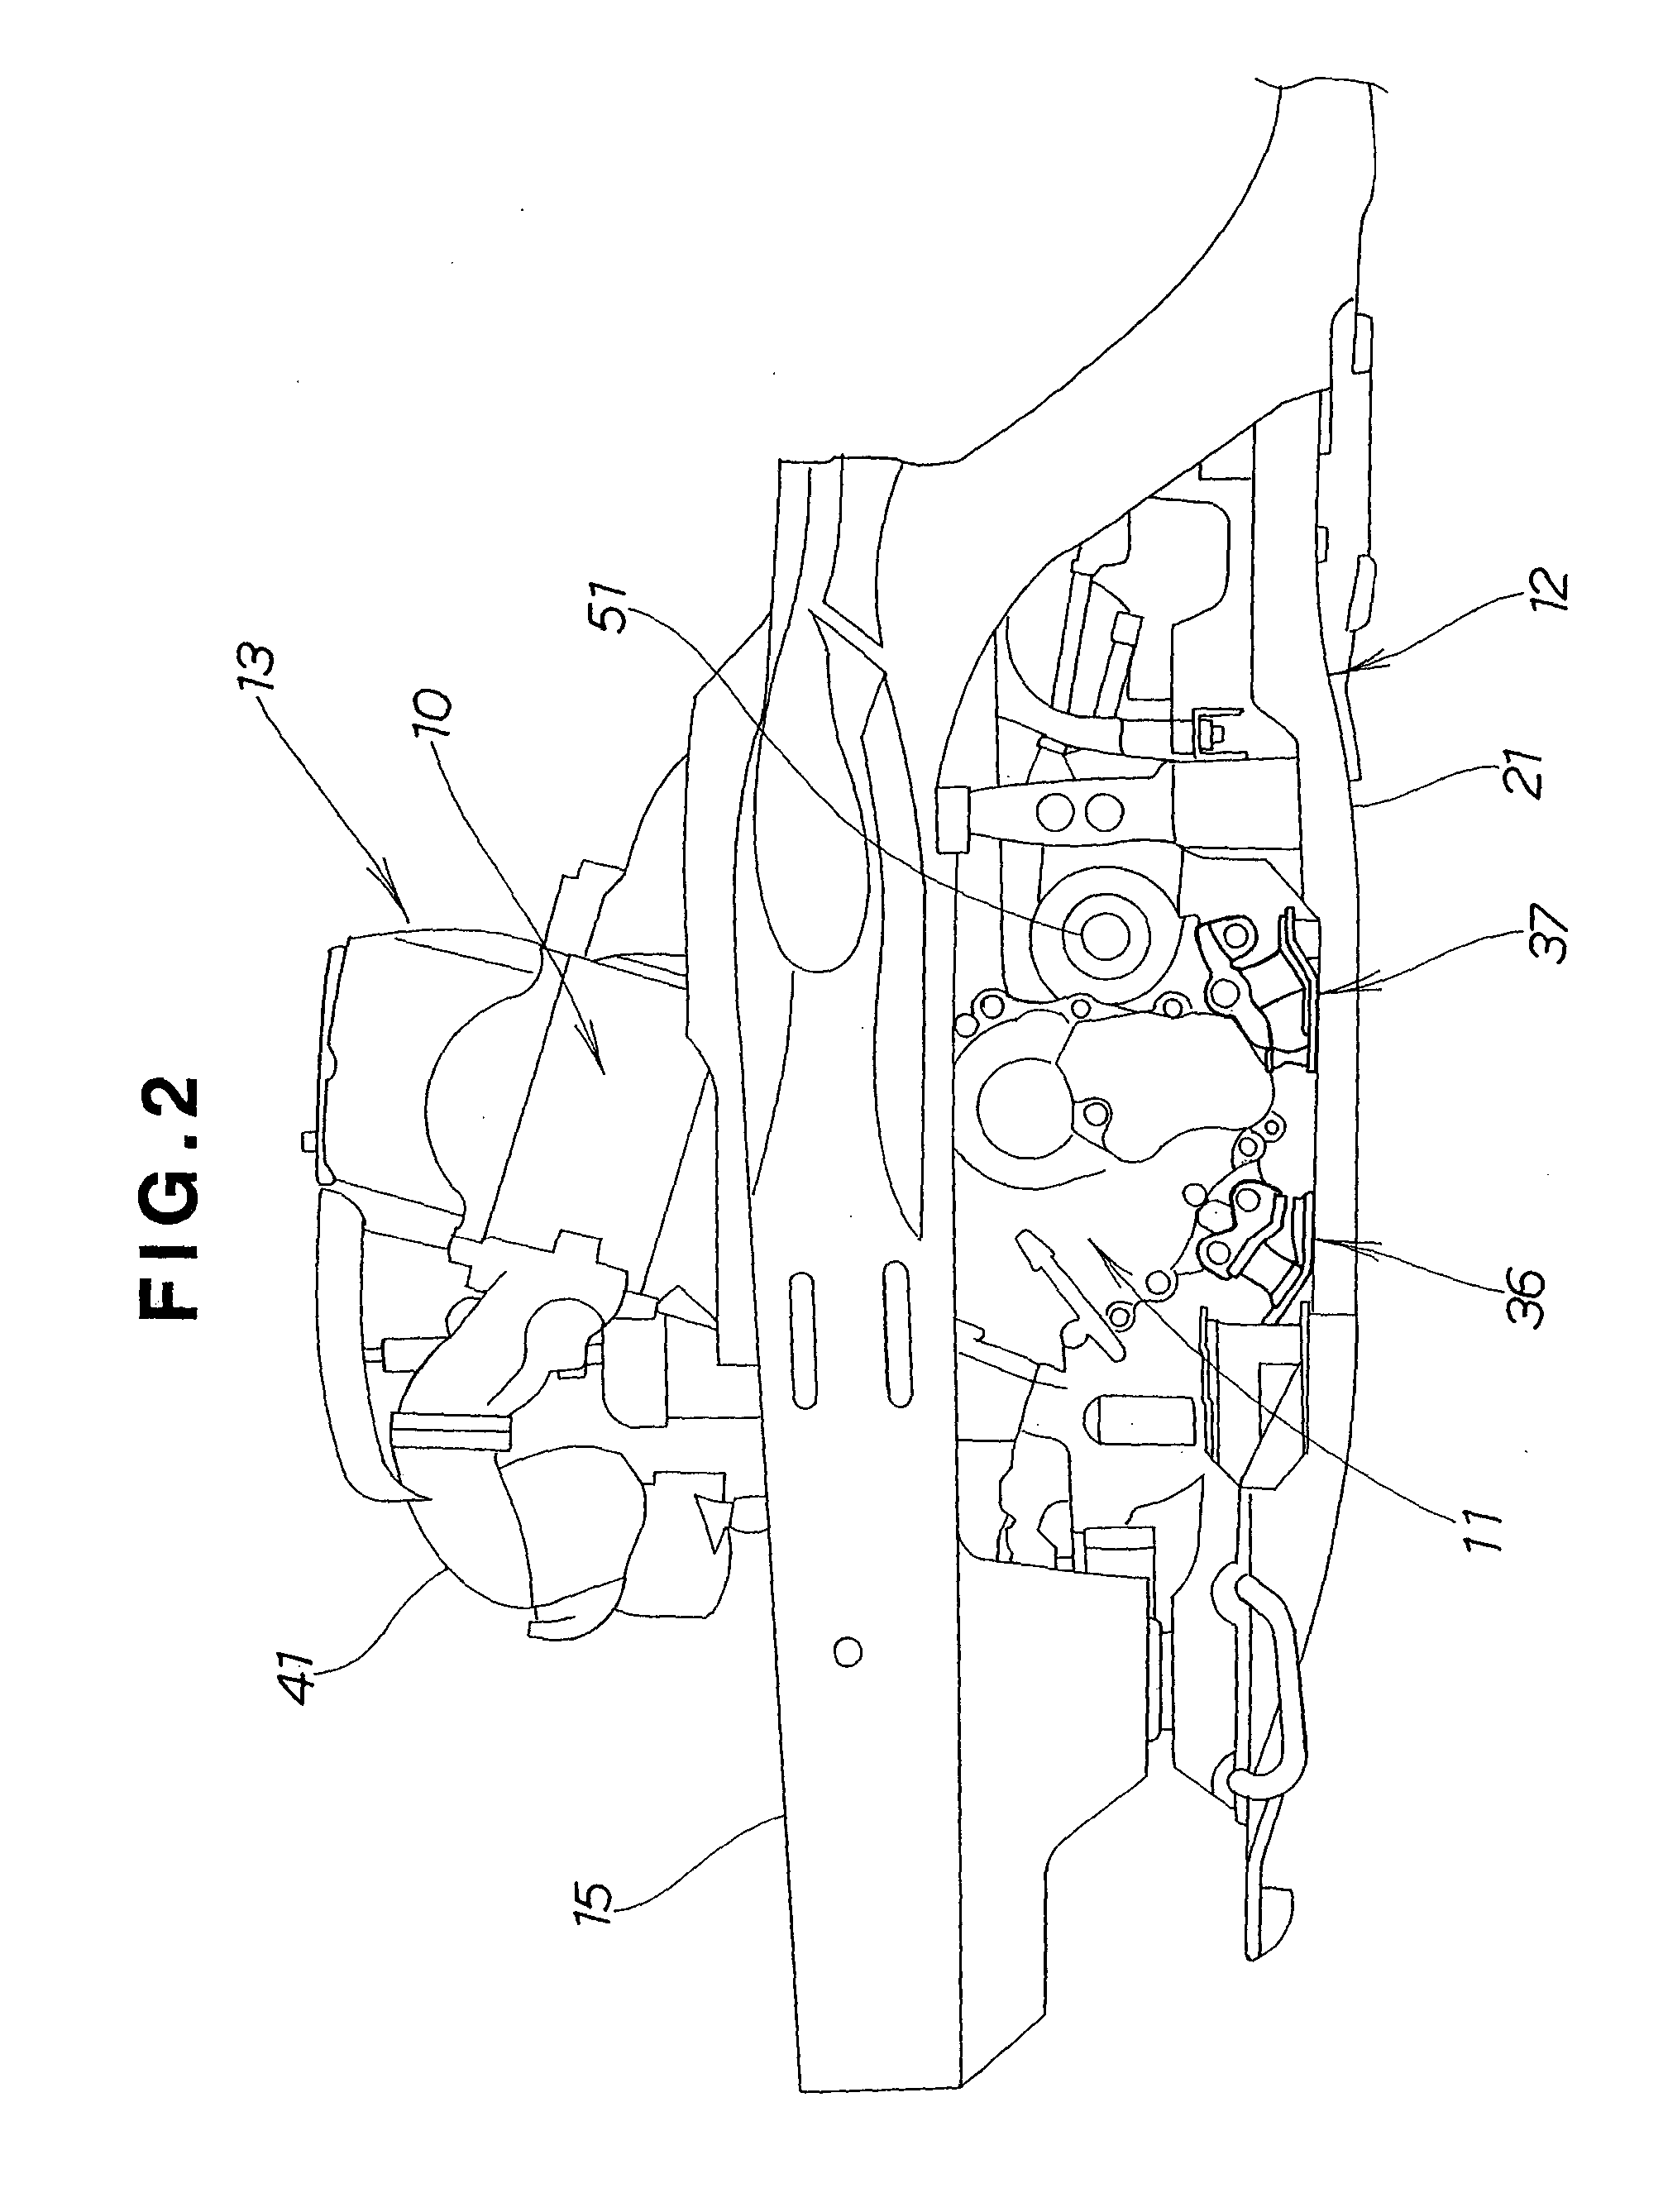 Transmission mount structure for vehicles